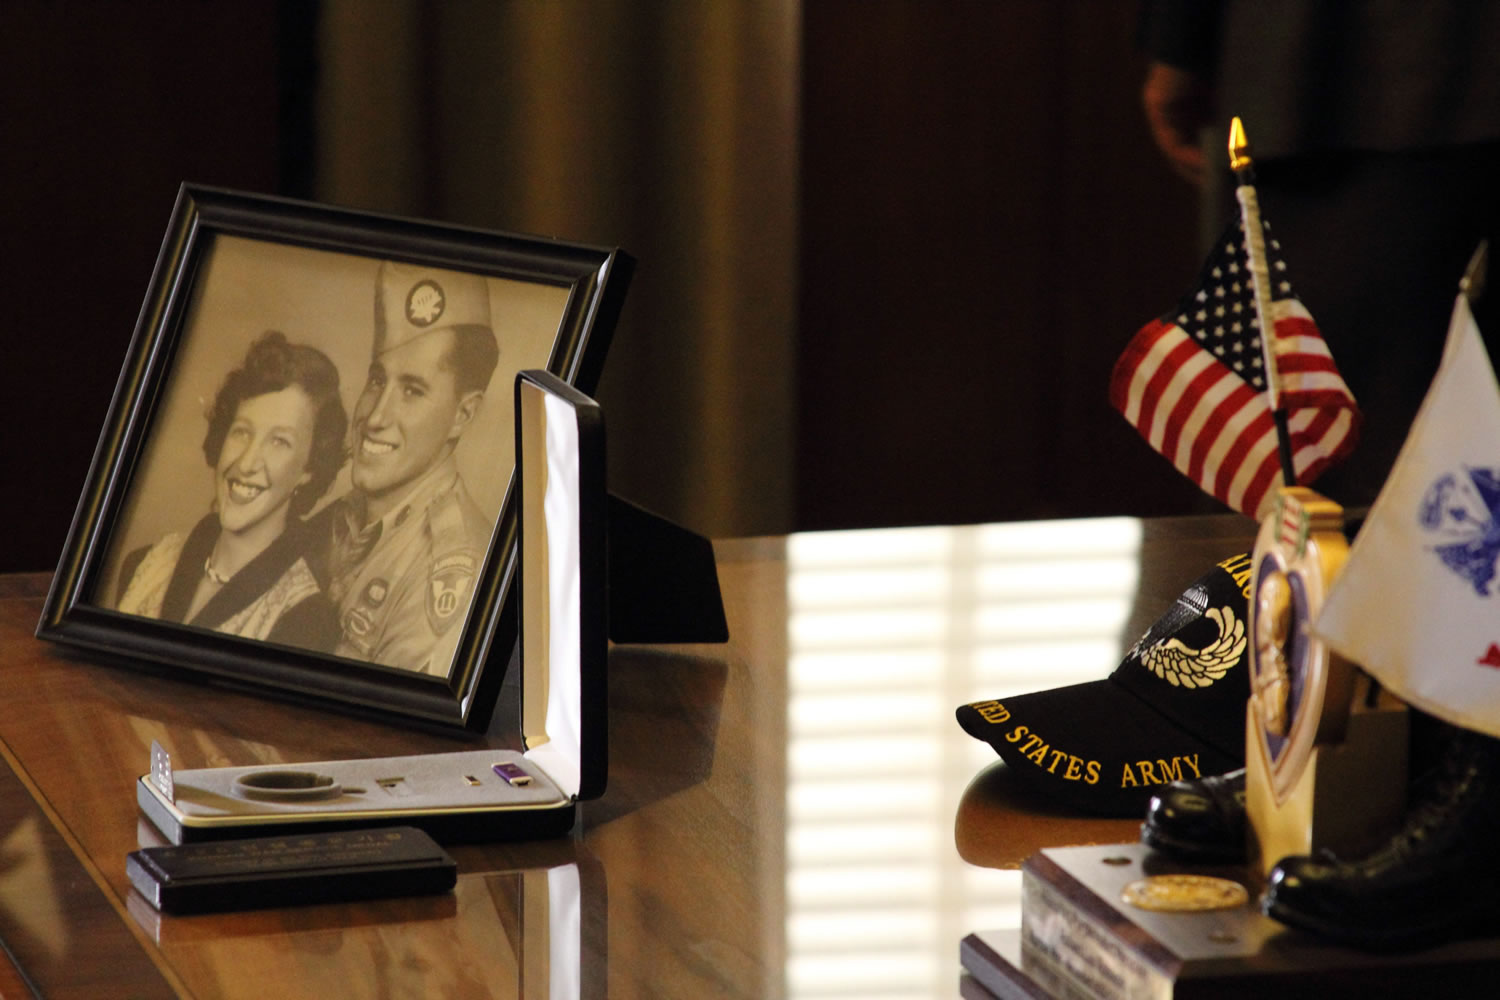 The case for the Purple Heart medal and other memorabilia is shown Friday at the state Capitol in Salem, Ore.